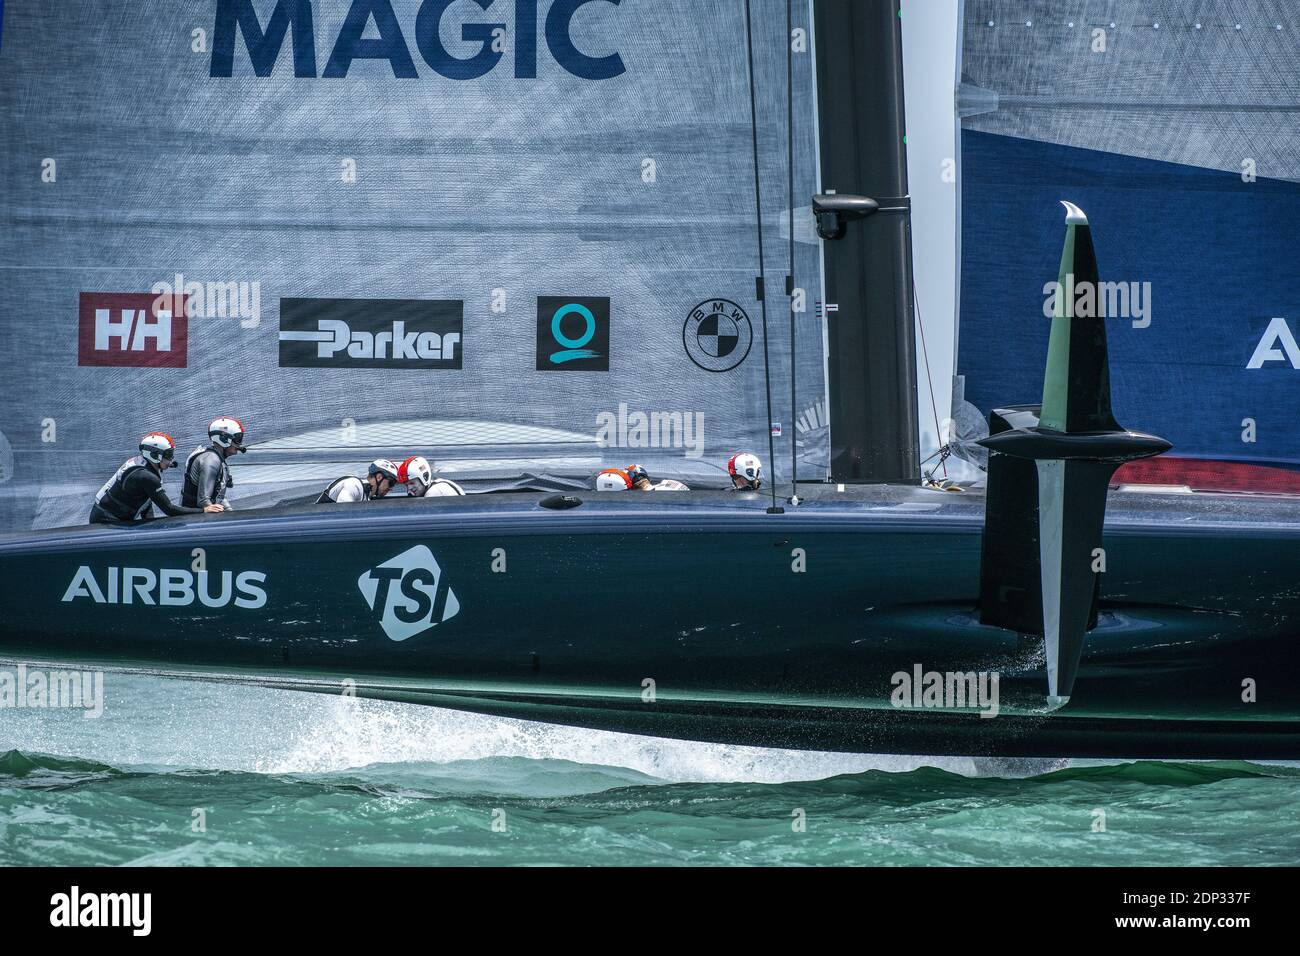 American Magic&#039;s AC75, Patriot before racing before racing during the Prada America&#039;s Cup World Series Auckland Race  / LM Stock Photo